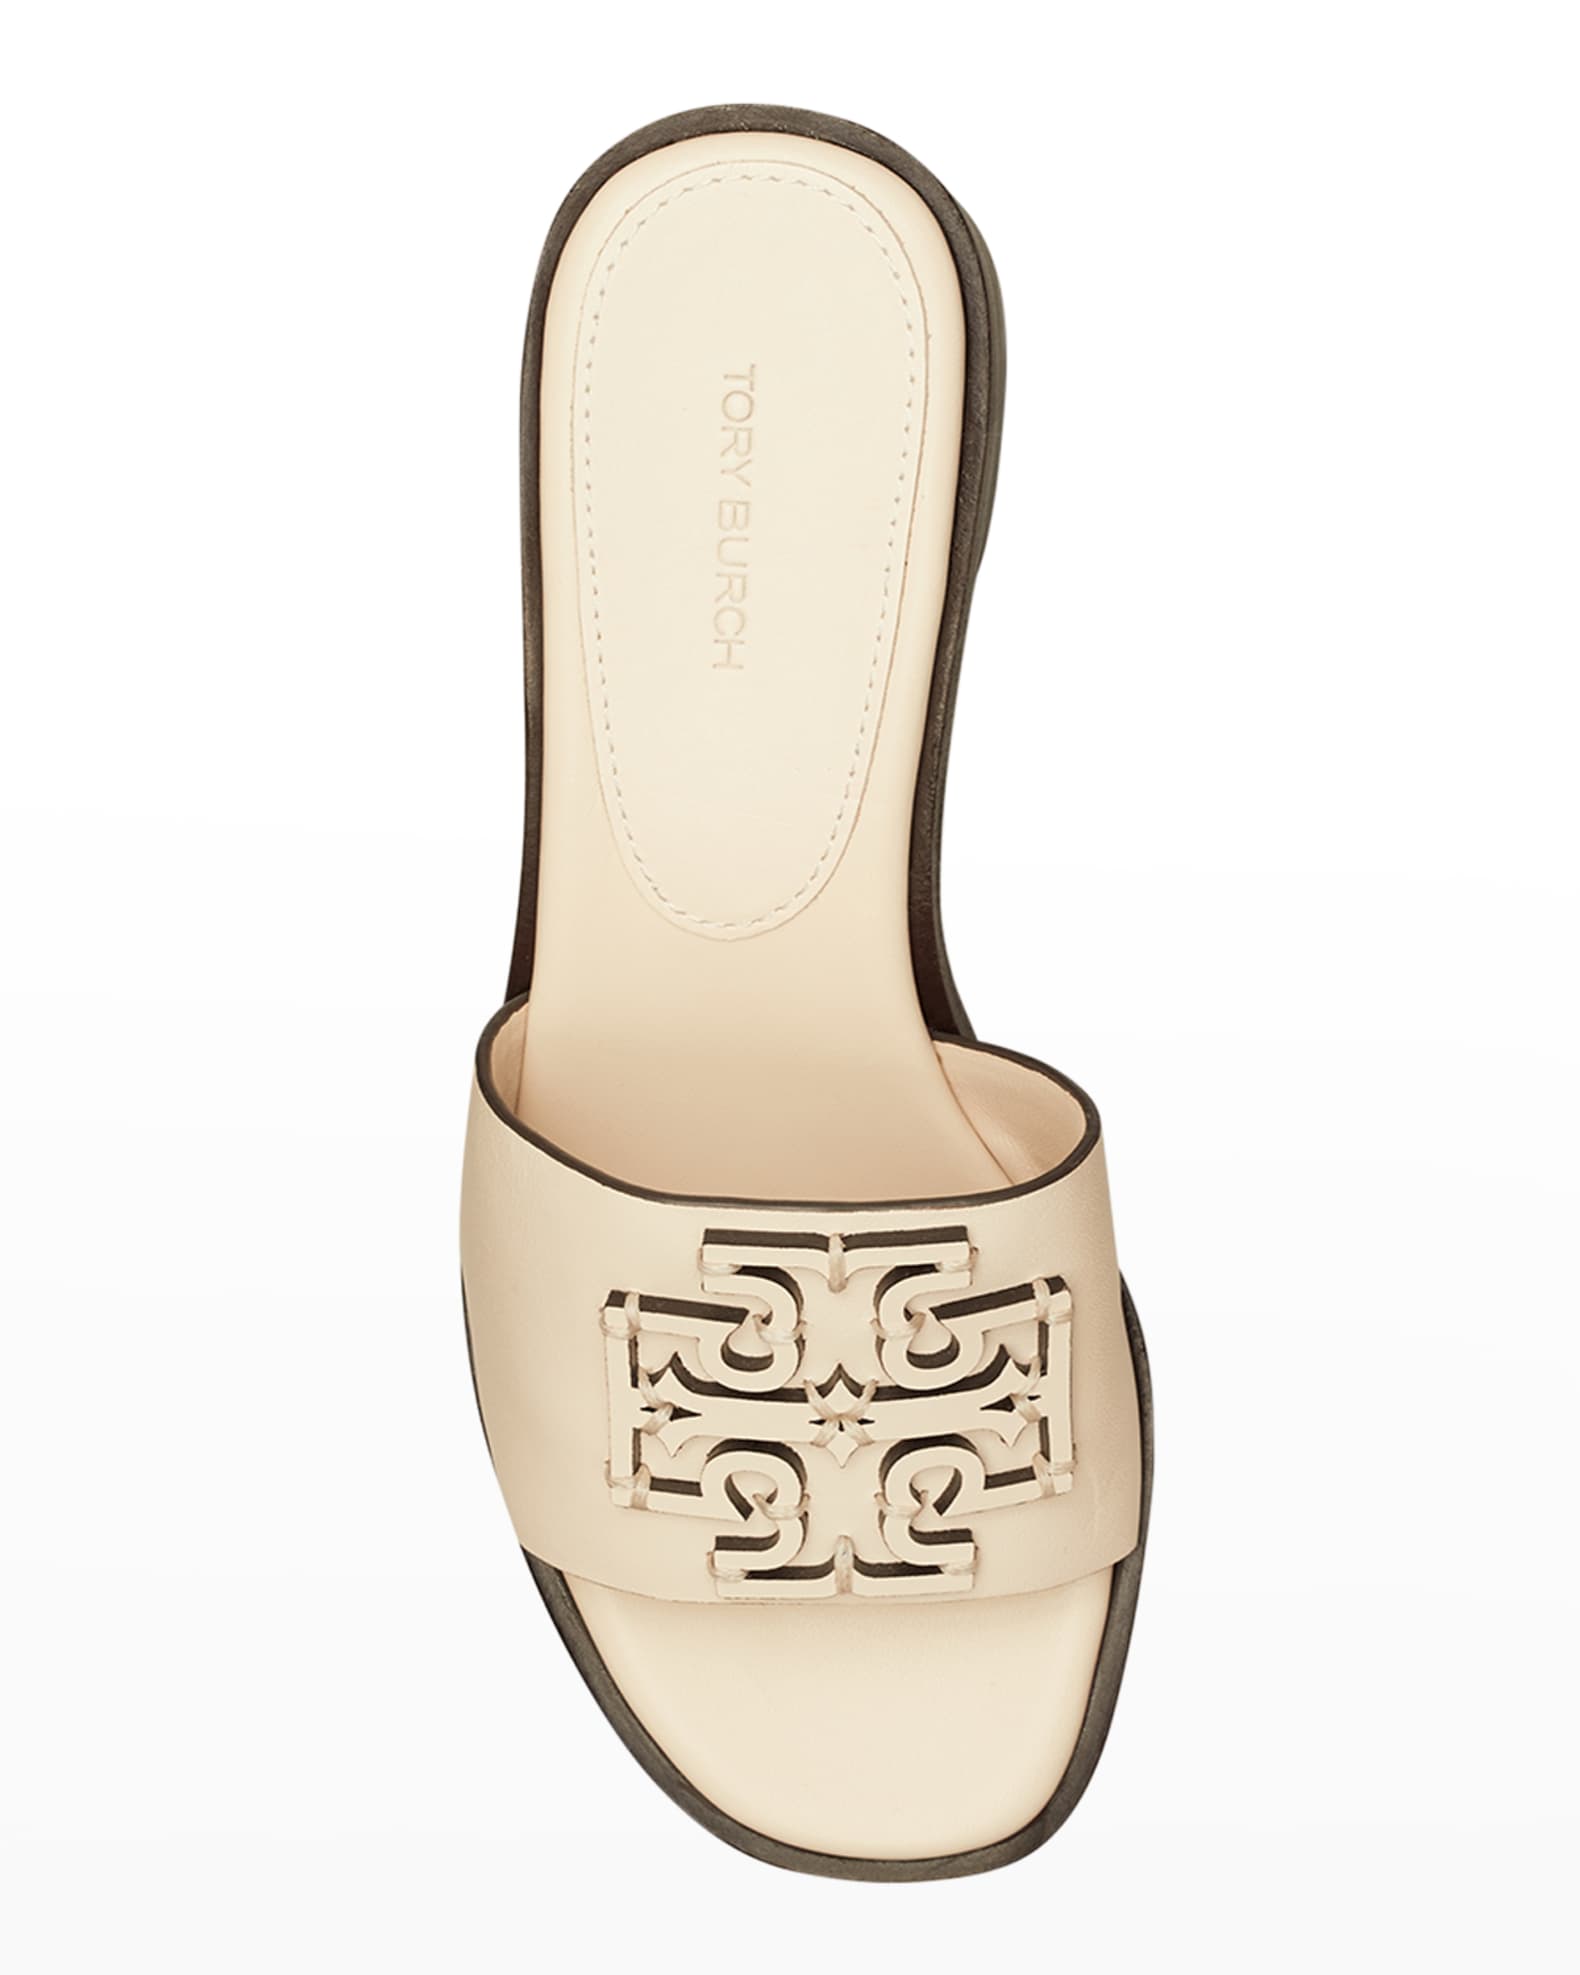 Tory Burch Ines Leather Medallion Heeled Sandals | Neiman Marcus